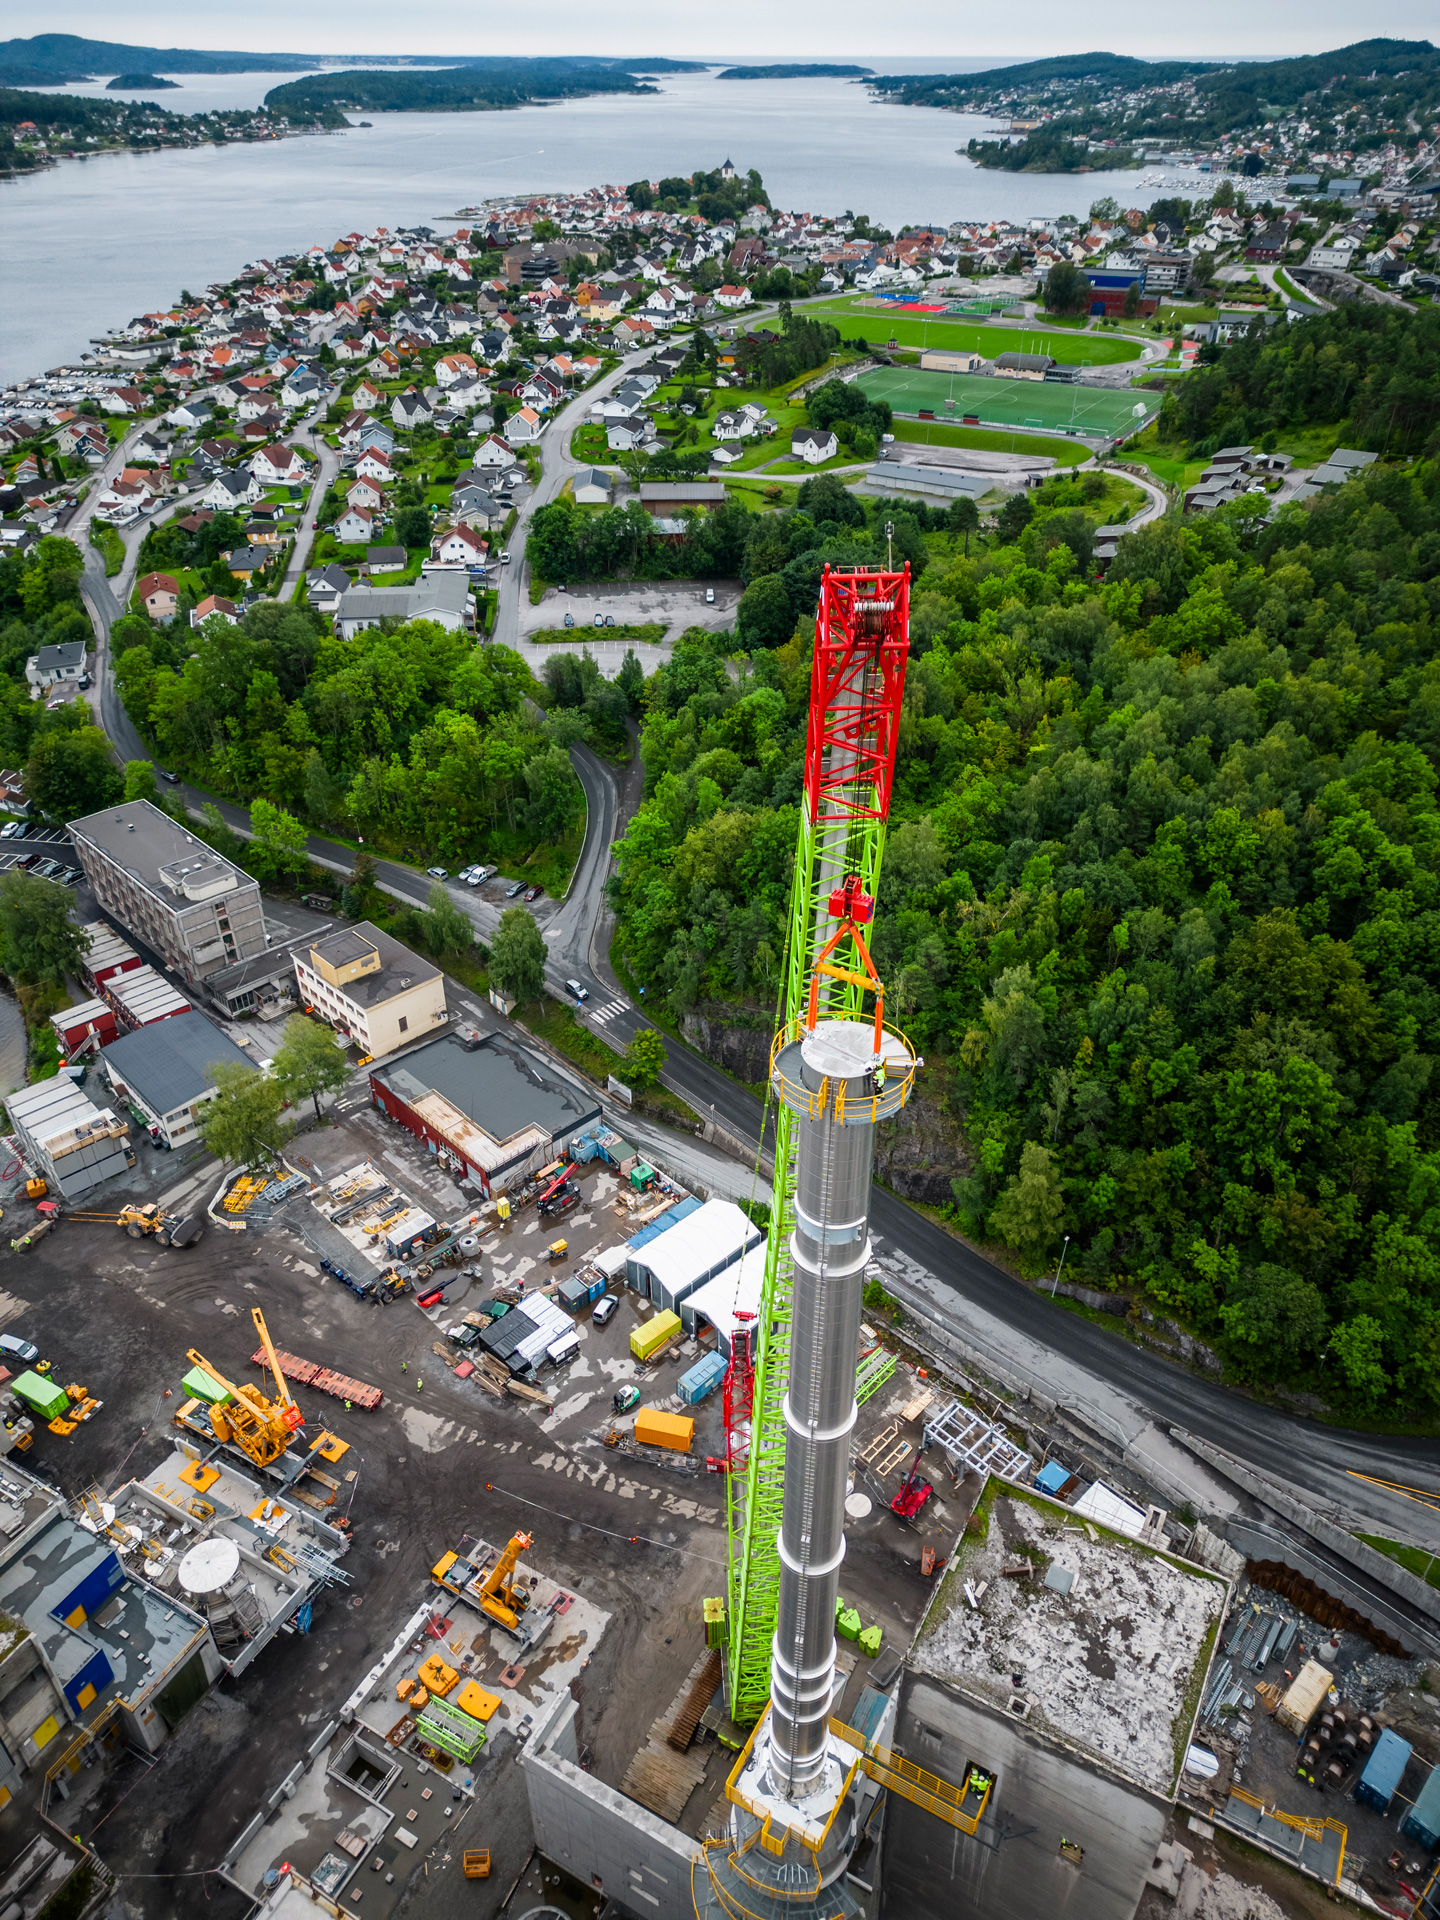 Aerial view of a construction crane towering over a cement plant near a residential area with lush greenery and a body of water in the background.